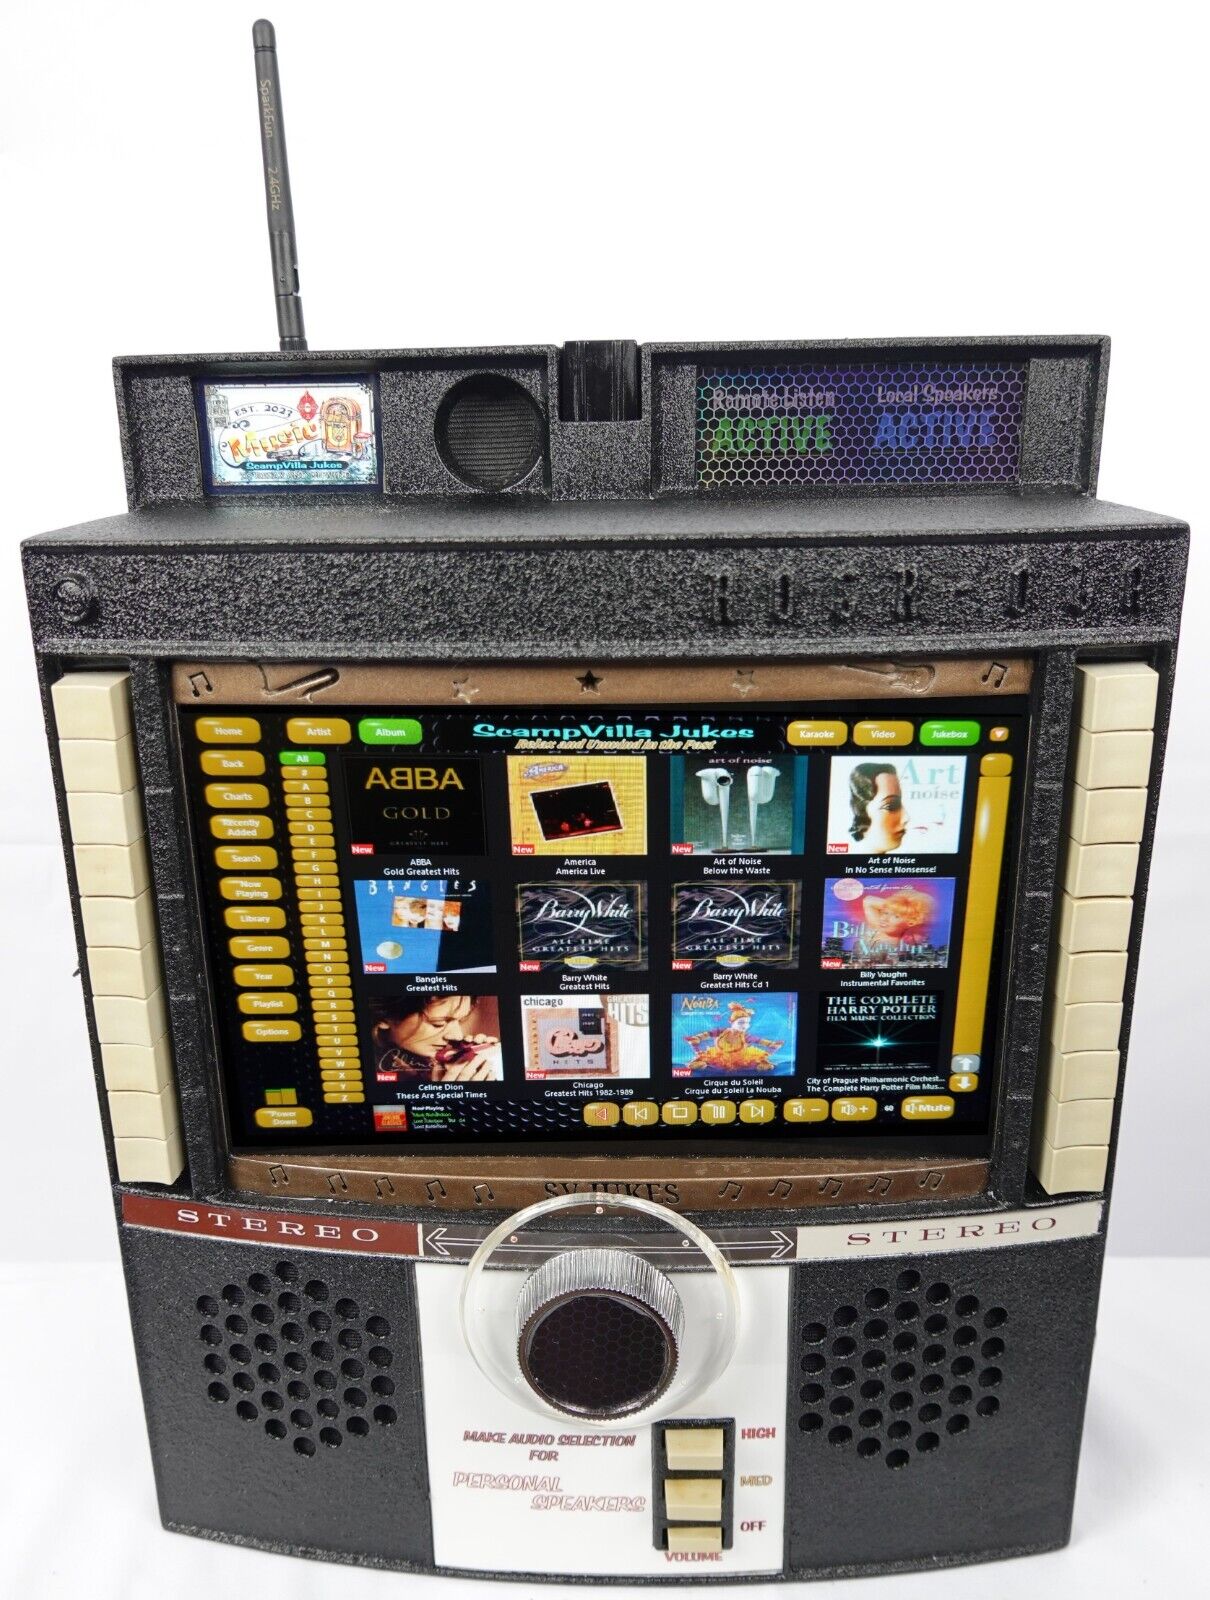 Rock-Ola 500 wall Jukebox now a Full advanced Stand Alone Touch Screen System